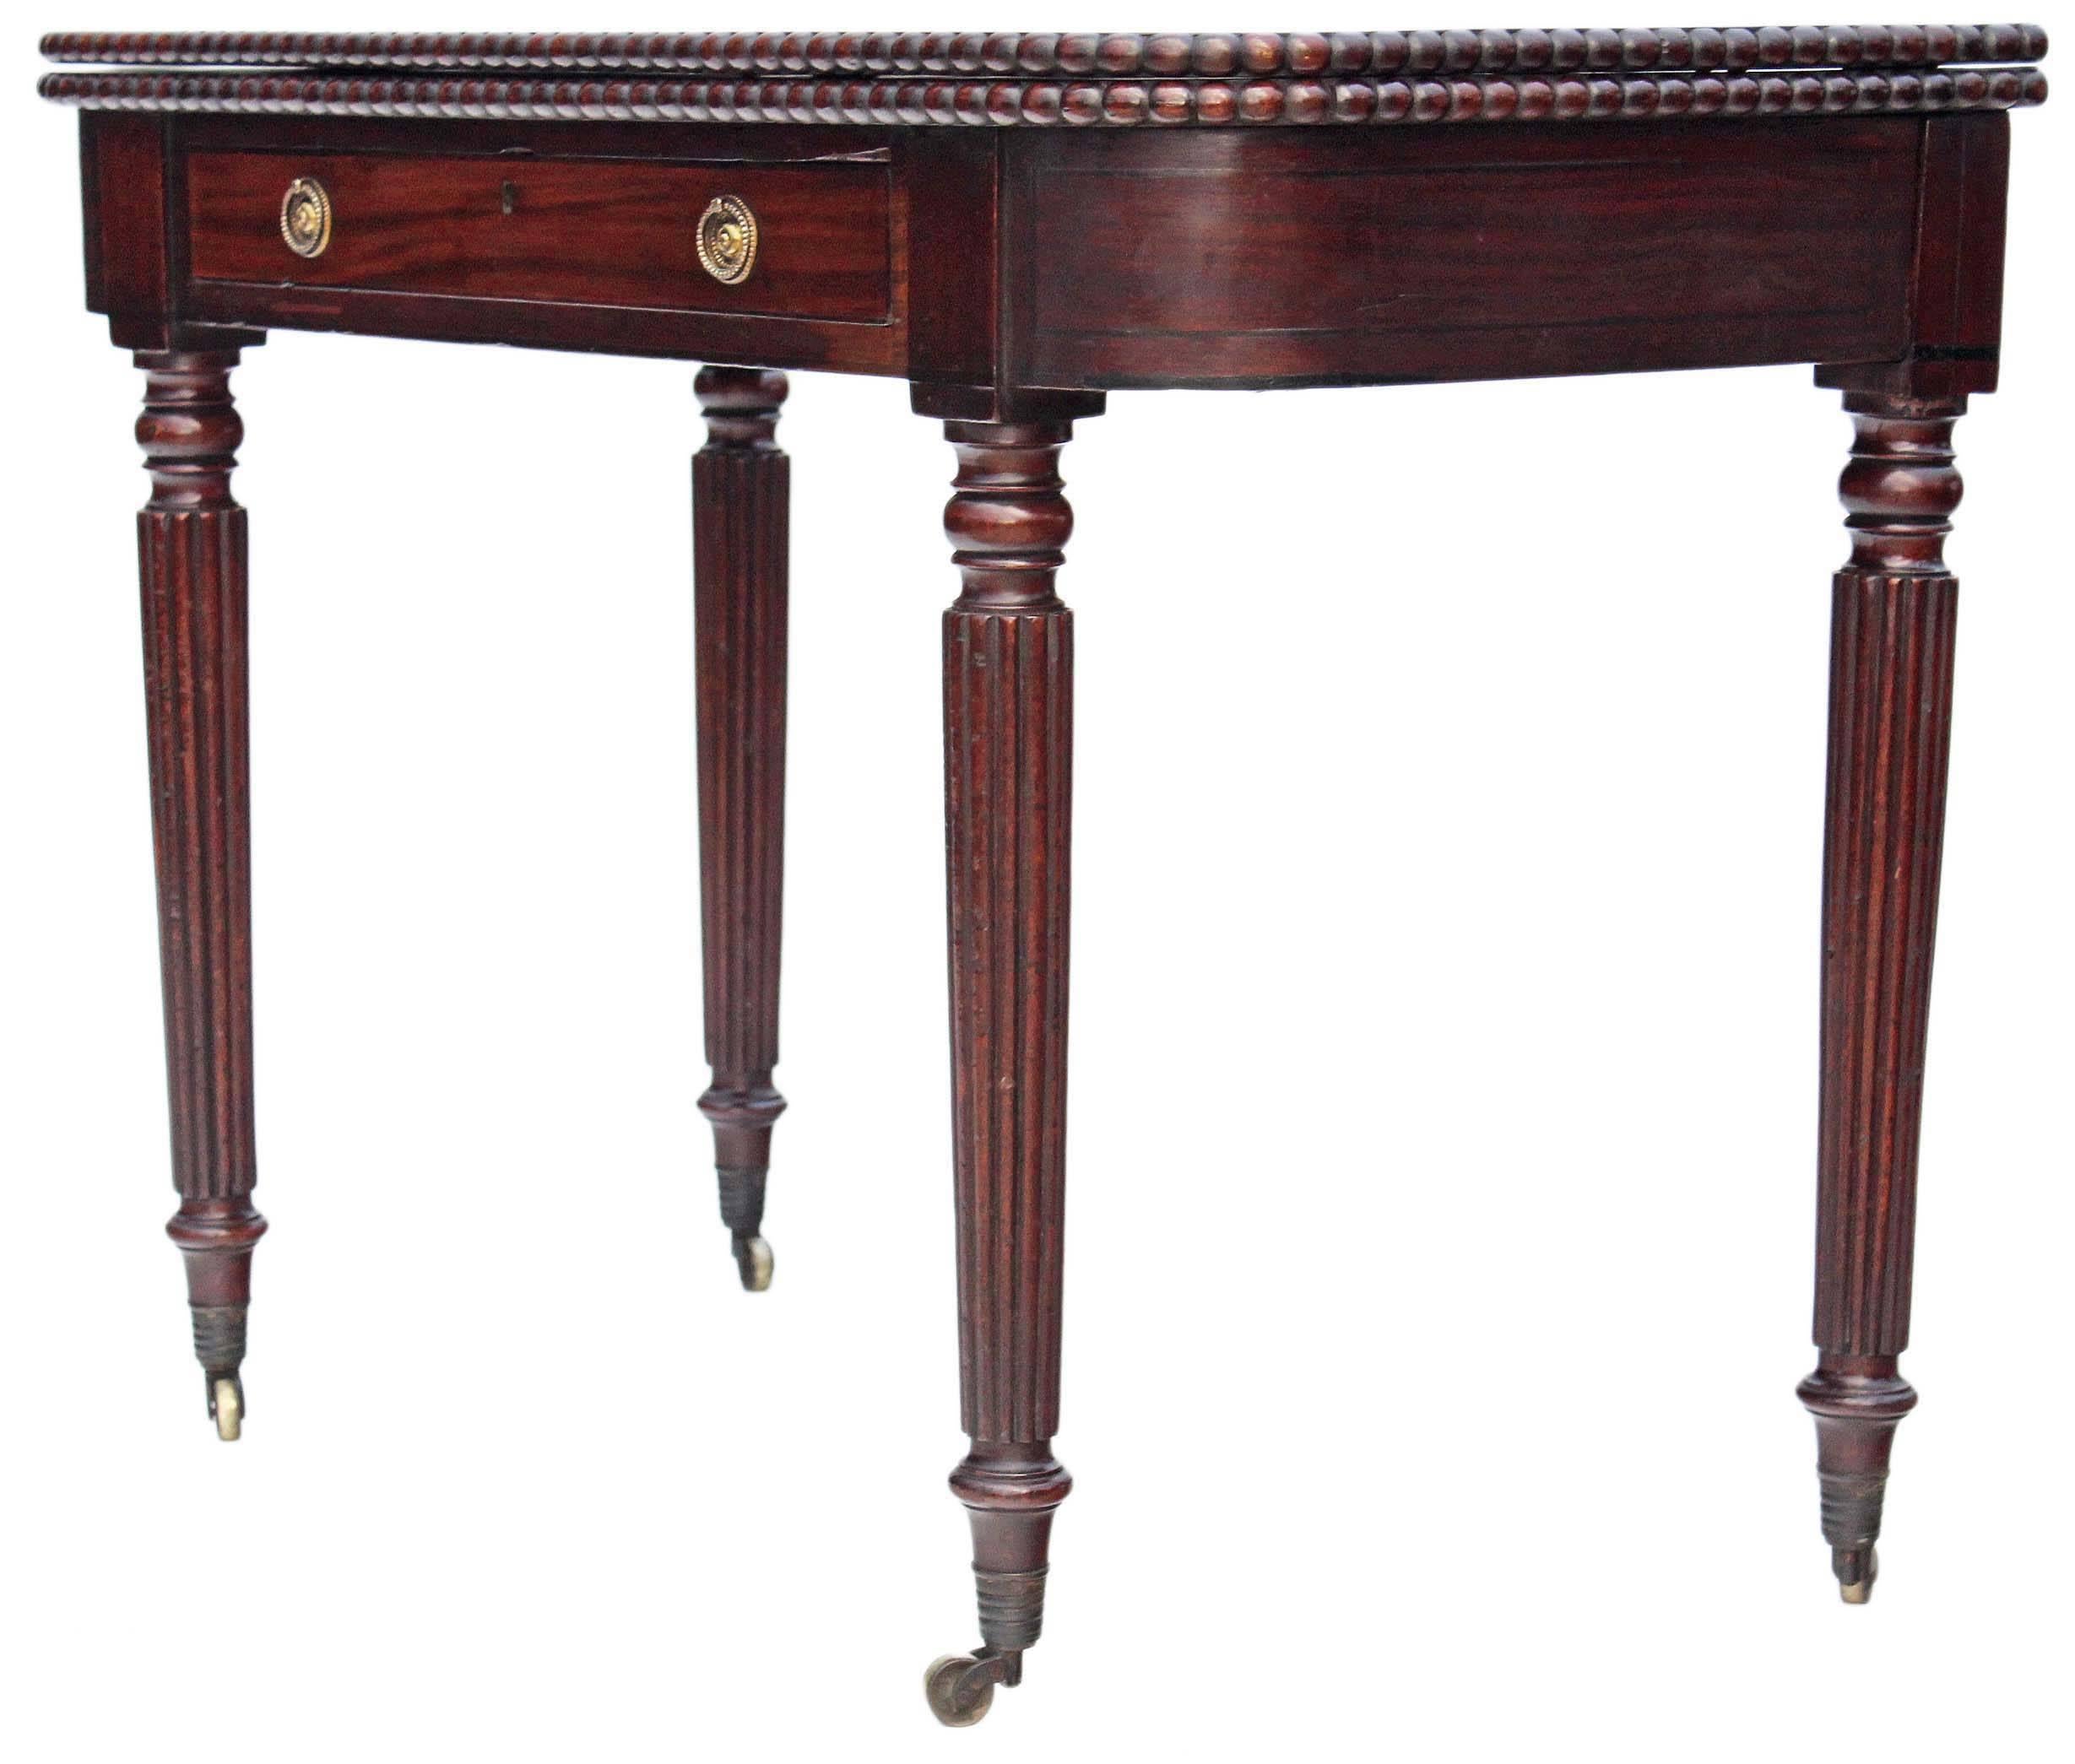 Antique Quality Victorian Mahogany 19th Century Folding Card Tea Table Console In Good Condition For Sale In Wisbech, Walton Wisbech